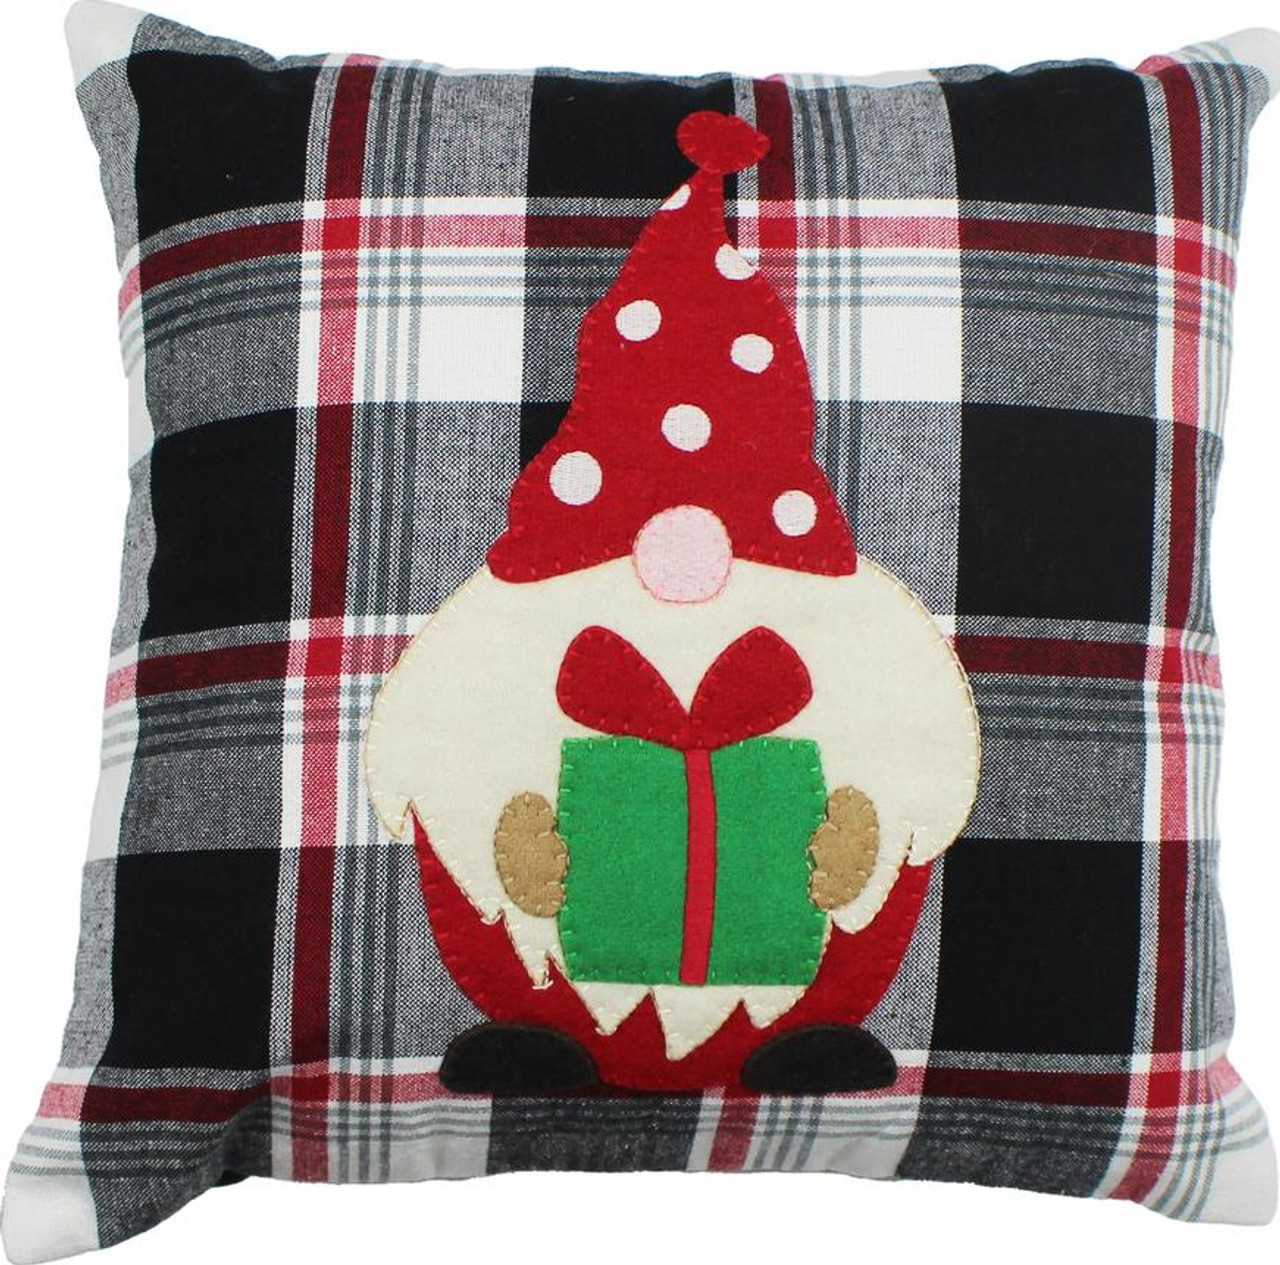 Tartan Pillow Cover With Furs, Winter Fall Throw Pillow Cover for